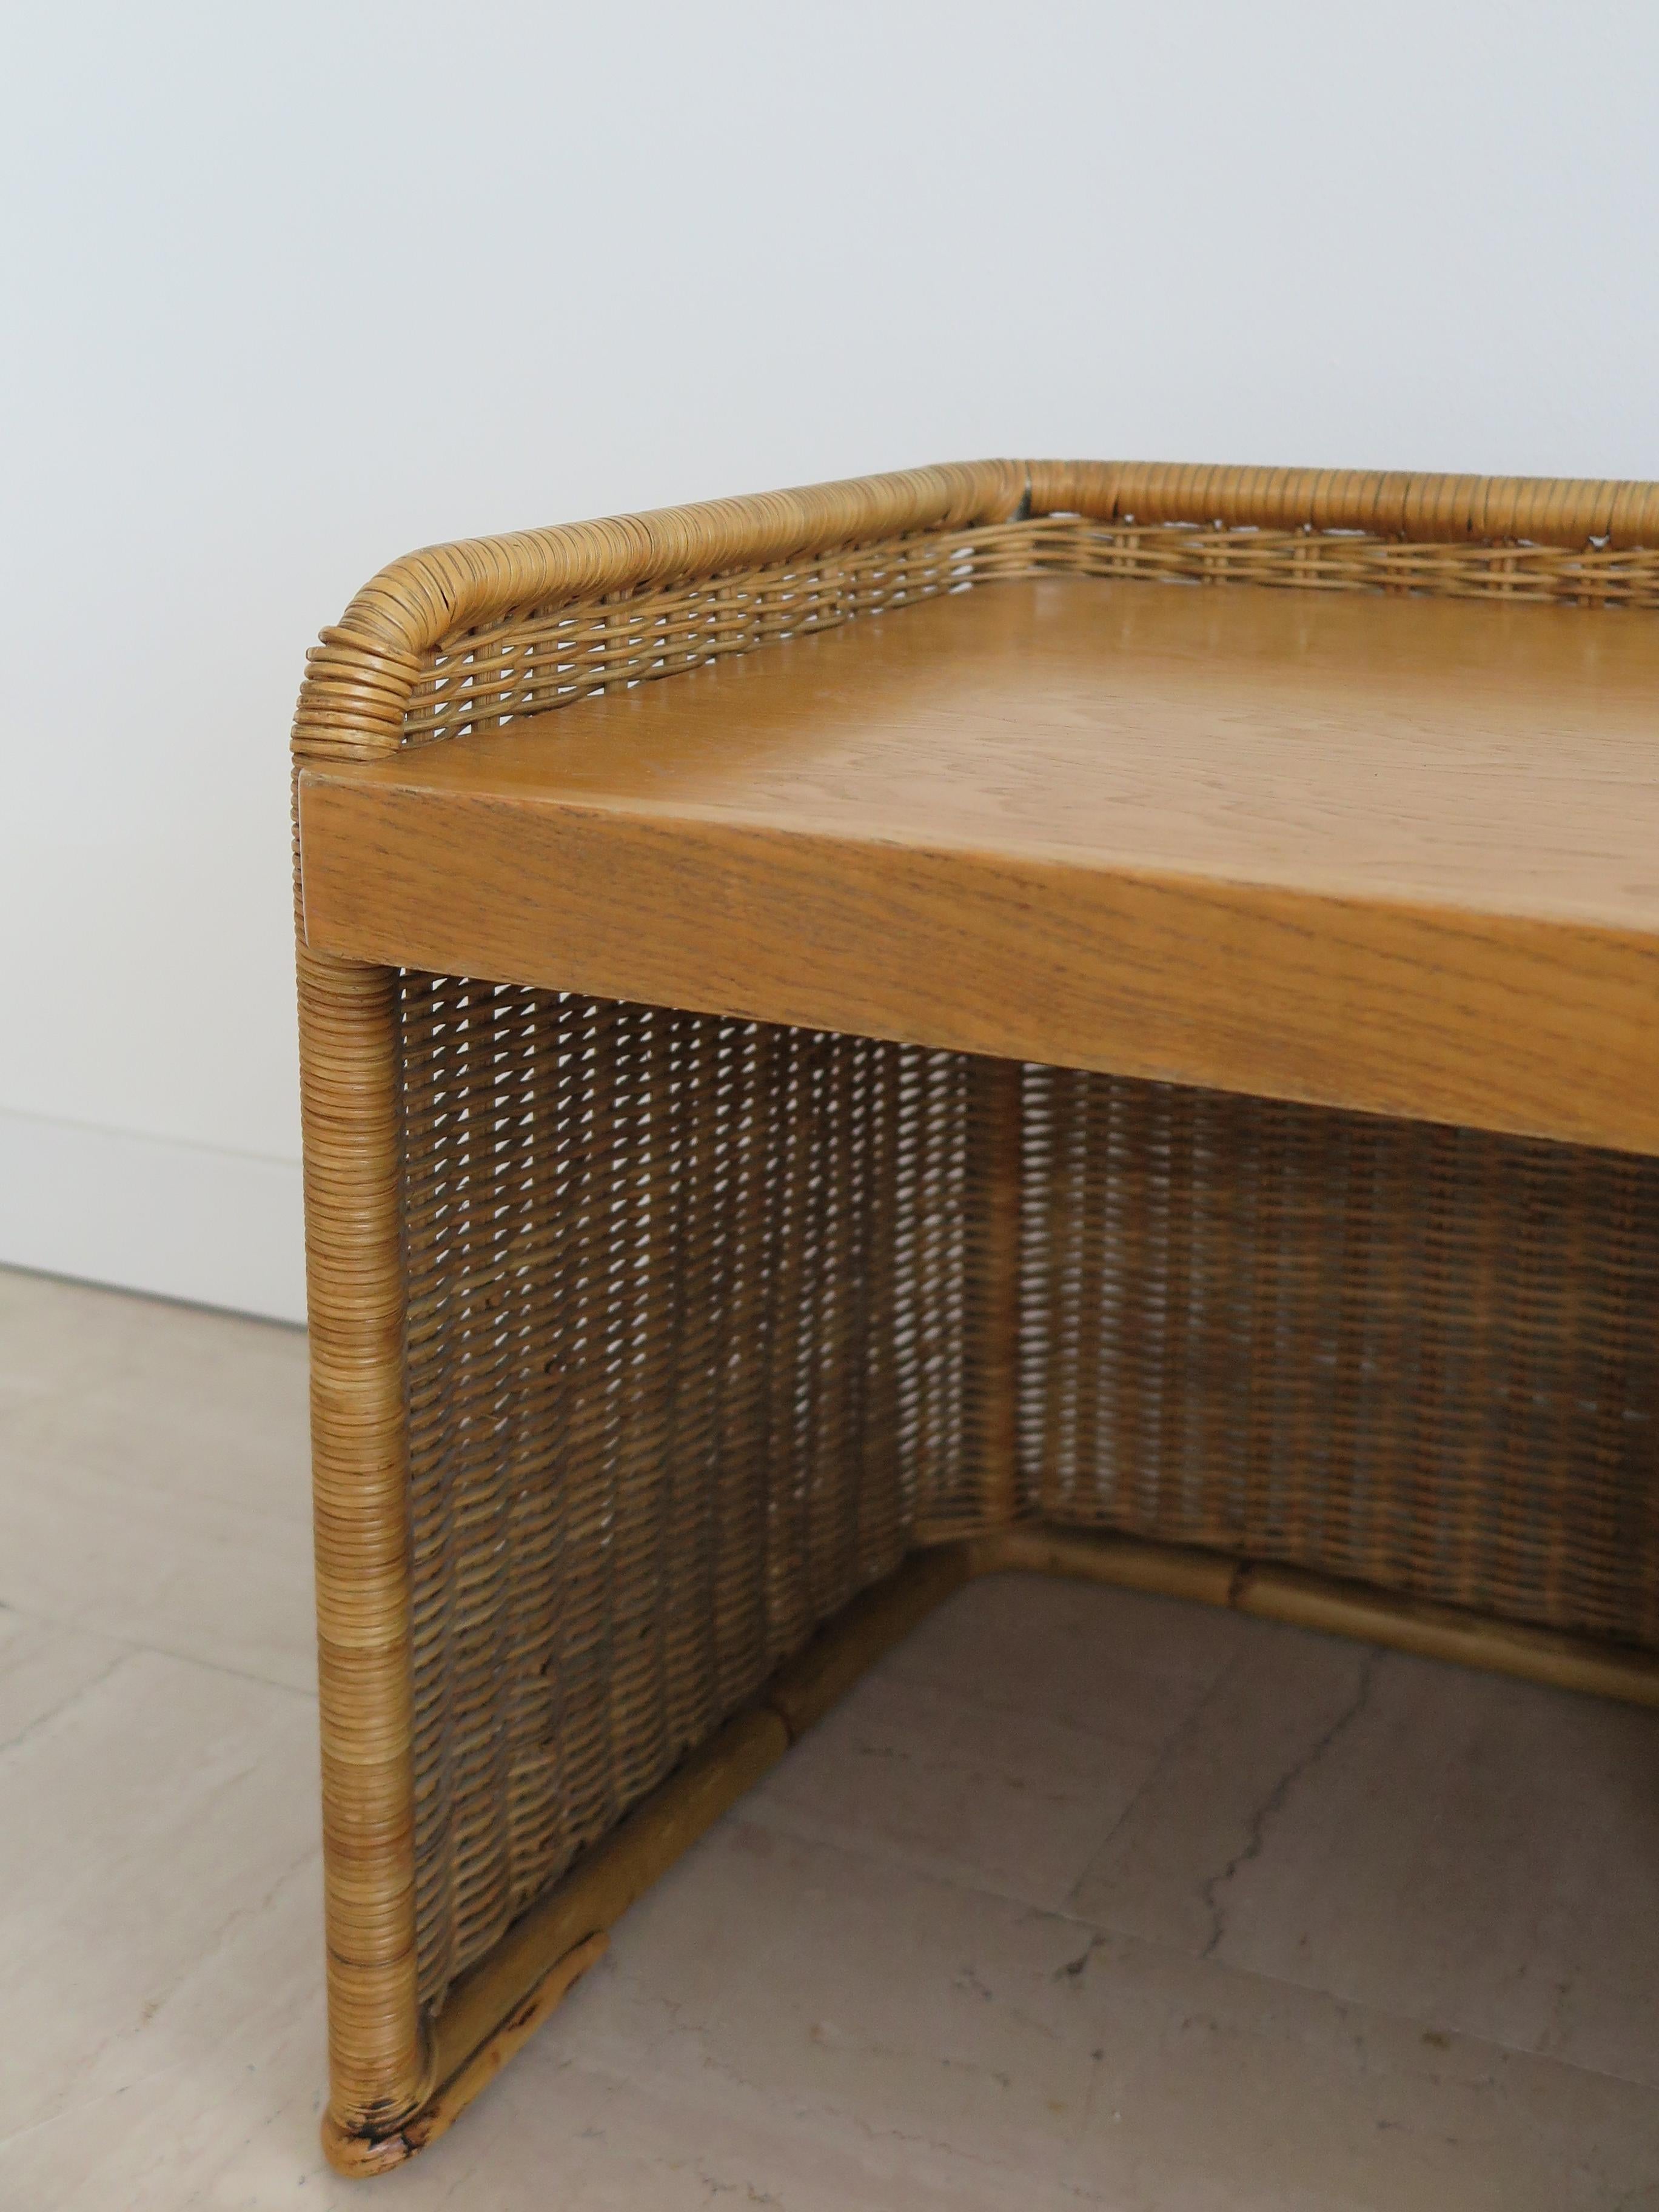 Italian Midcentury Rattan Bamboo Bedside Tables Night Stands, 1950s For Sale 1